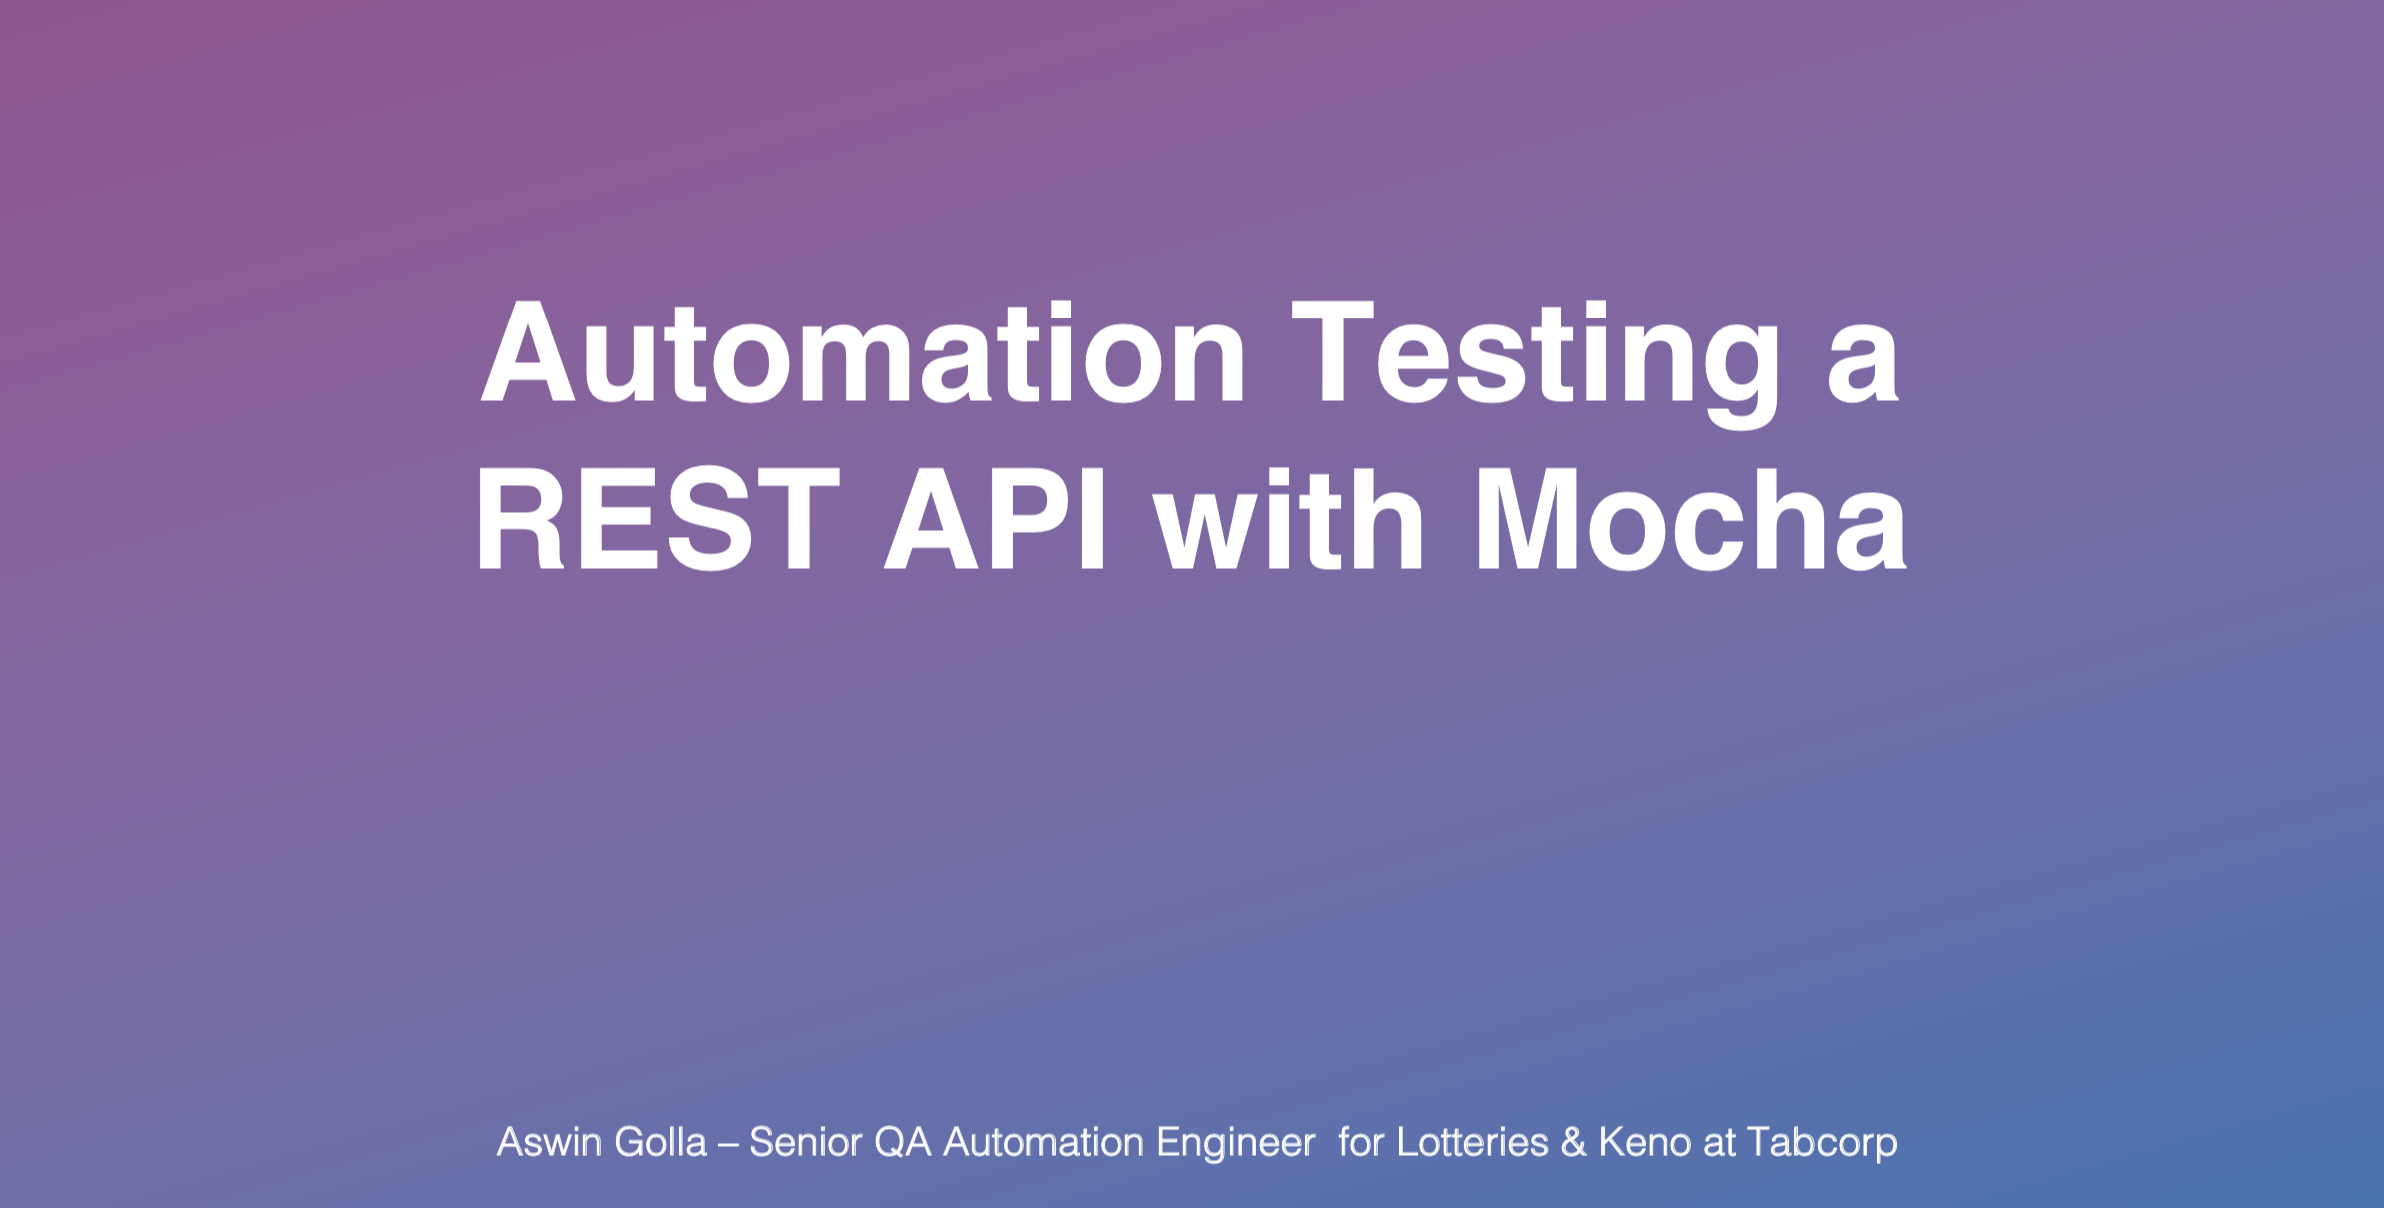 Automation Tesing a REST API with Mocha